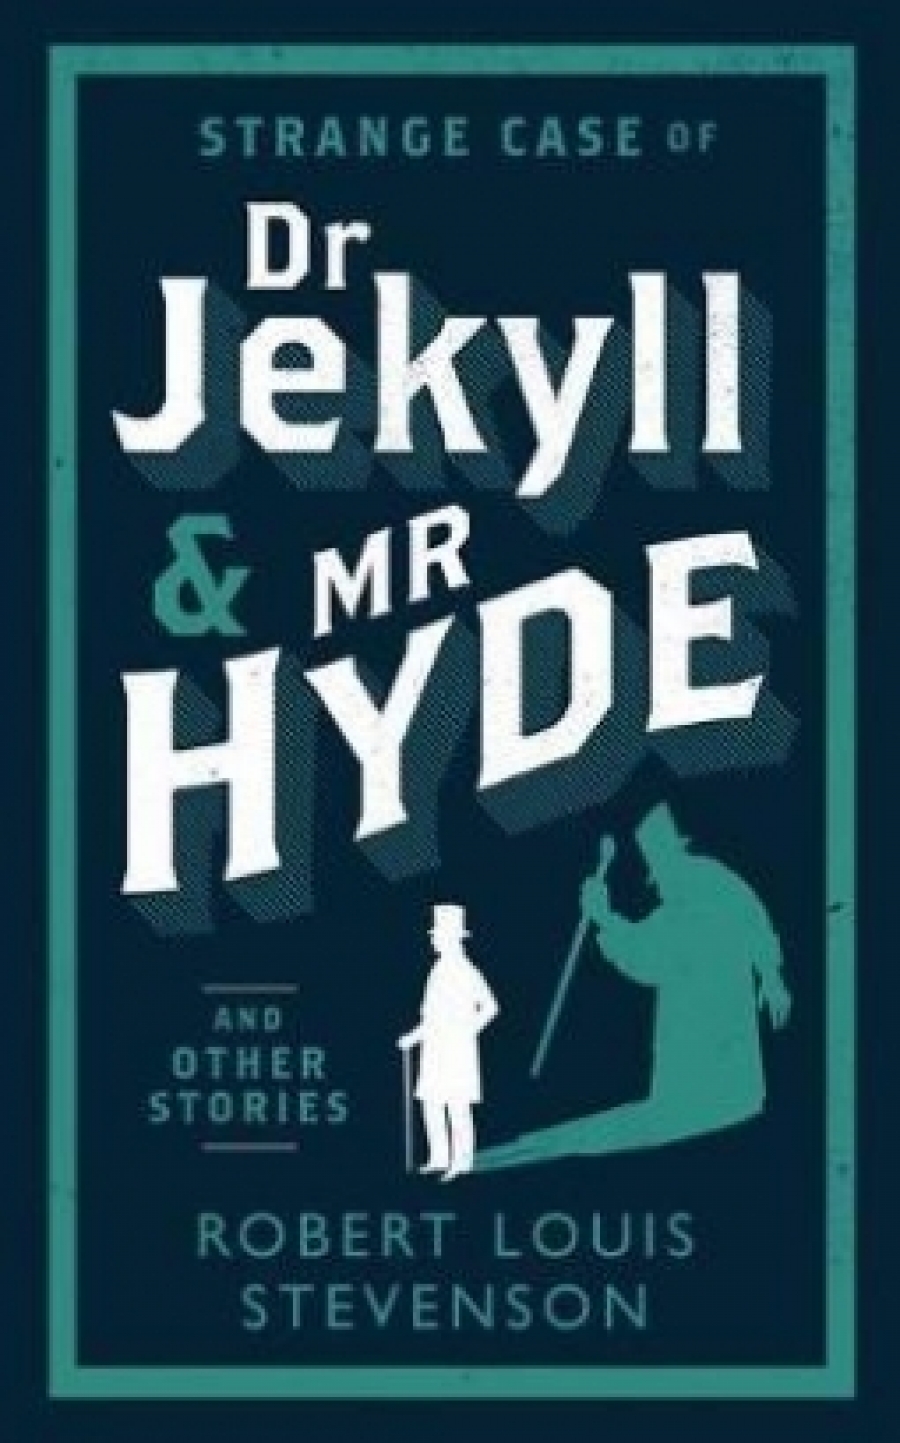 Stevenson Robert Louis Strange Case of Dr Jekyll and Mr Hyde and Other Stories 